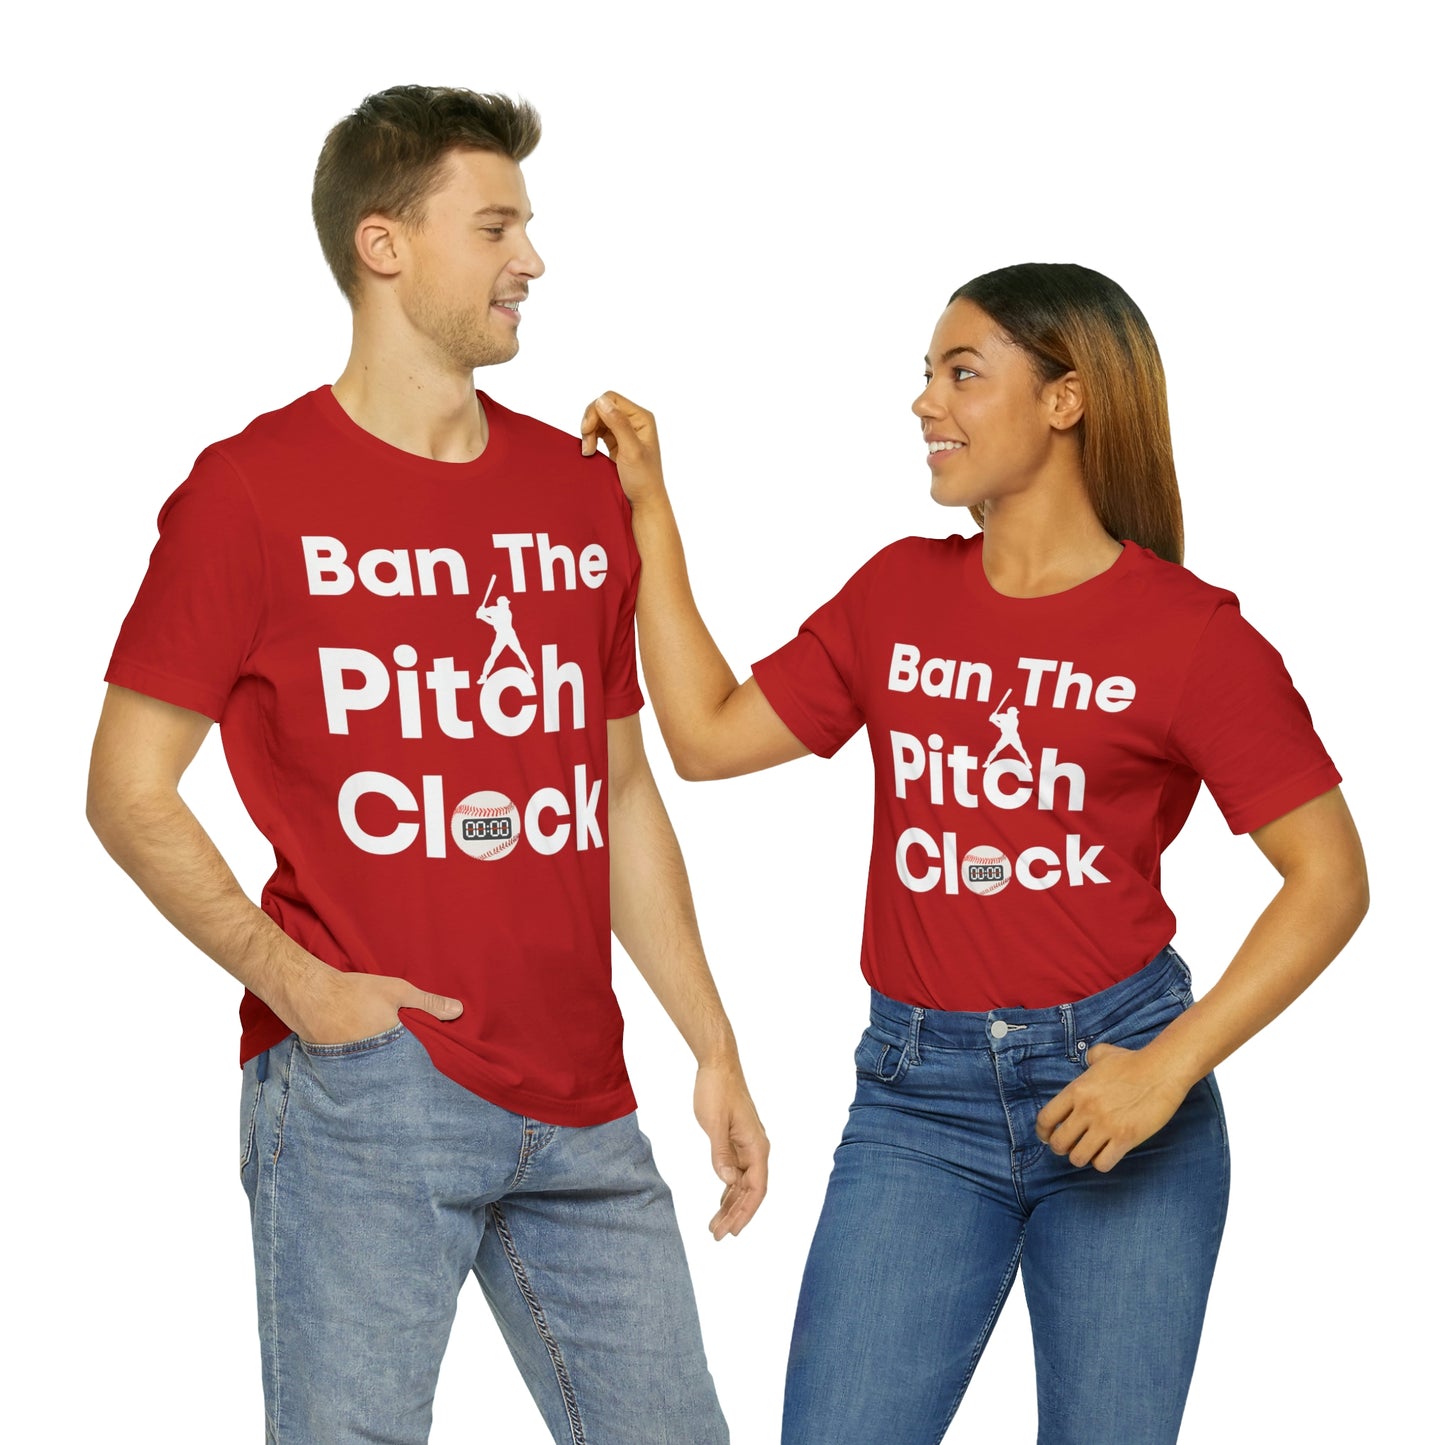 Ban The Pitch Clock in Baseball Ban Baseball Pitch Clock - Show Your Support By Wearing this shirt to the Games